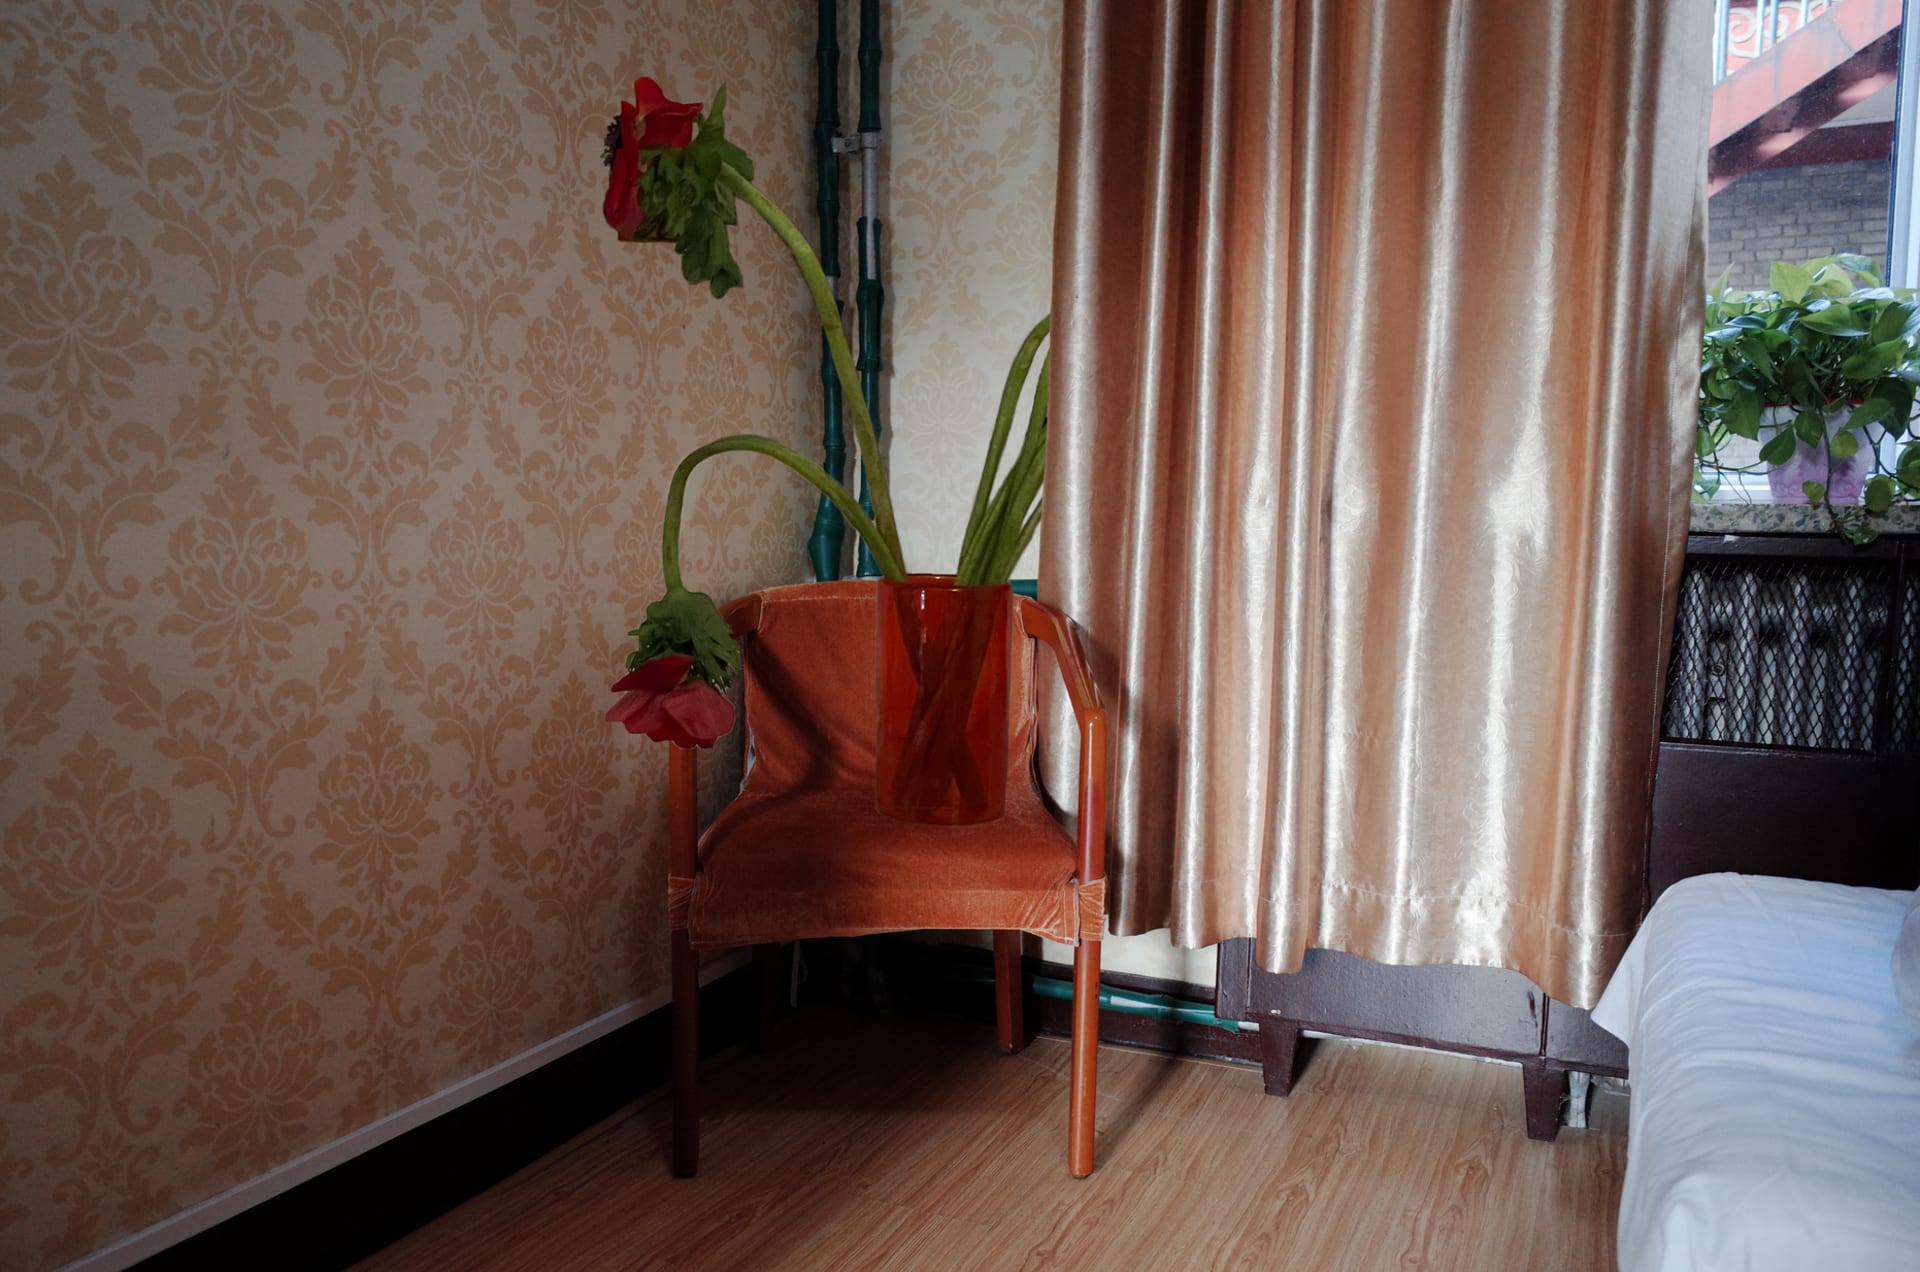 a flower sitting on a chair